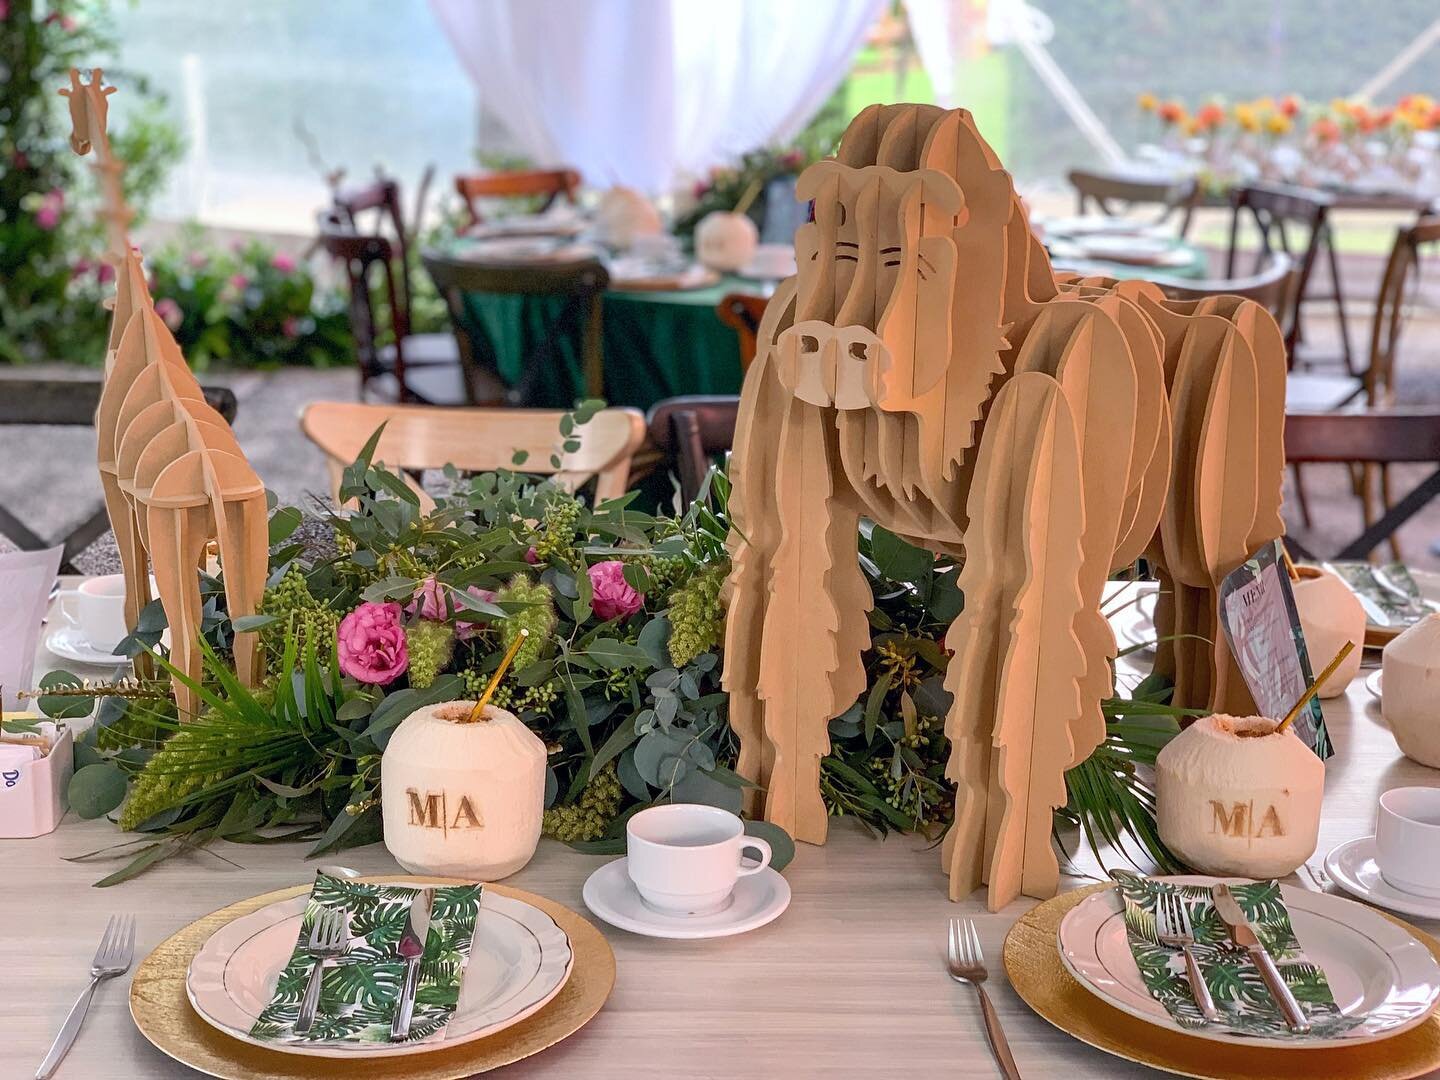 🦒WELCOME TO THE JUNGLE 🐘 Mariana&rsquo;s Bach! 

#bachelorette #party #love #flowers #bacheloretteparty #jungle #bride #groom #wedding #jungleparty #engagement #engagementring #foliage #lisianthus #green #greenery #tablesetting #tablestyling #table